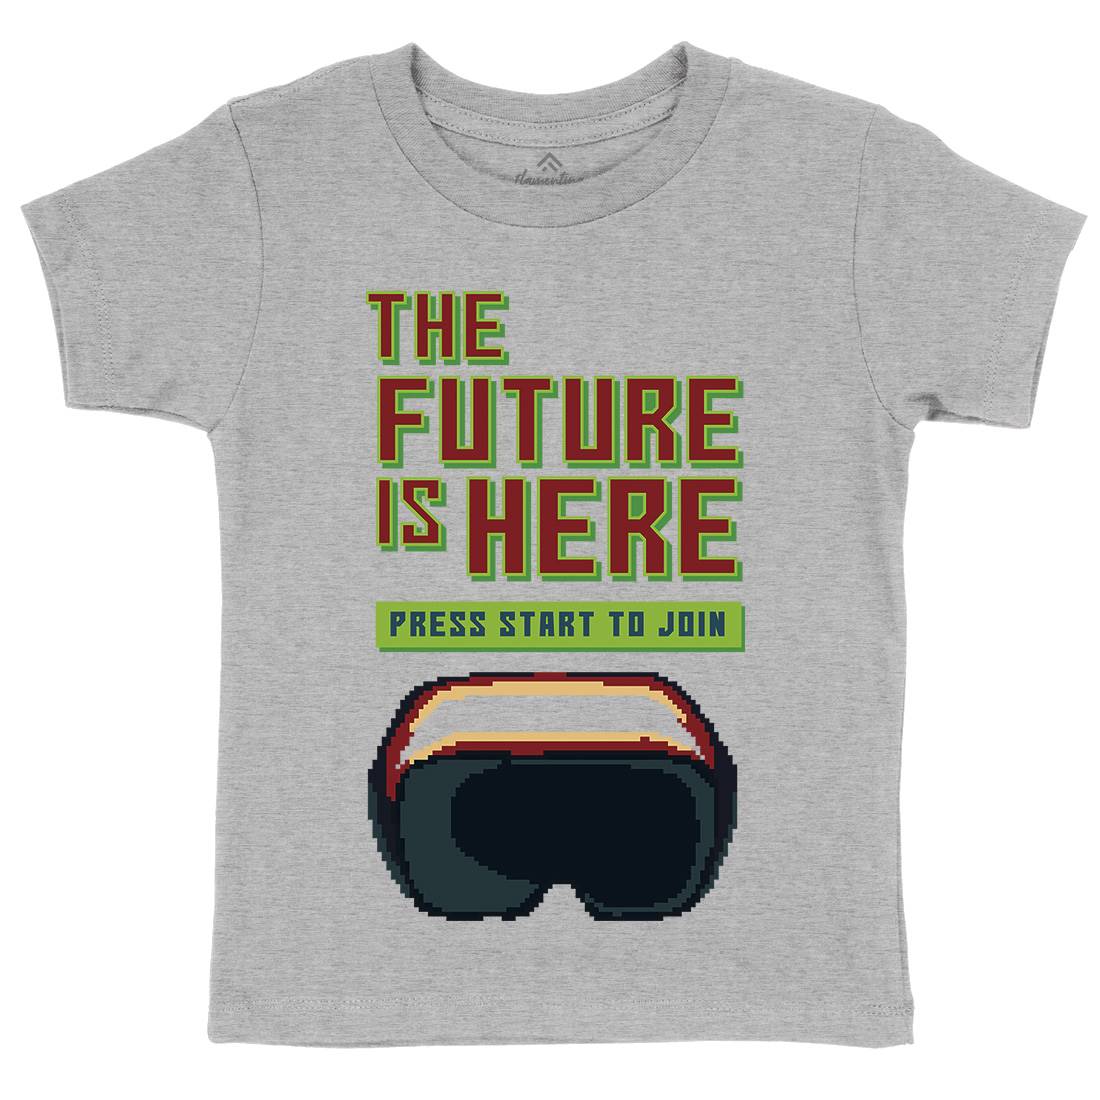 The Future Is Here Kids Crew Neck T-Shirt Geek B967